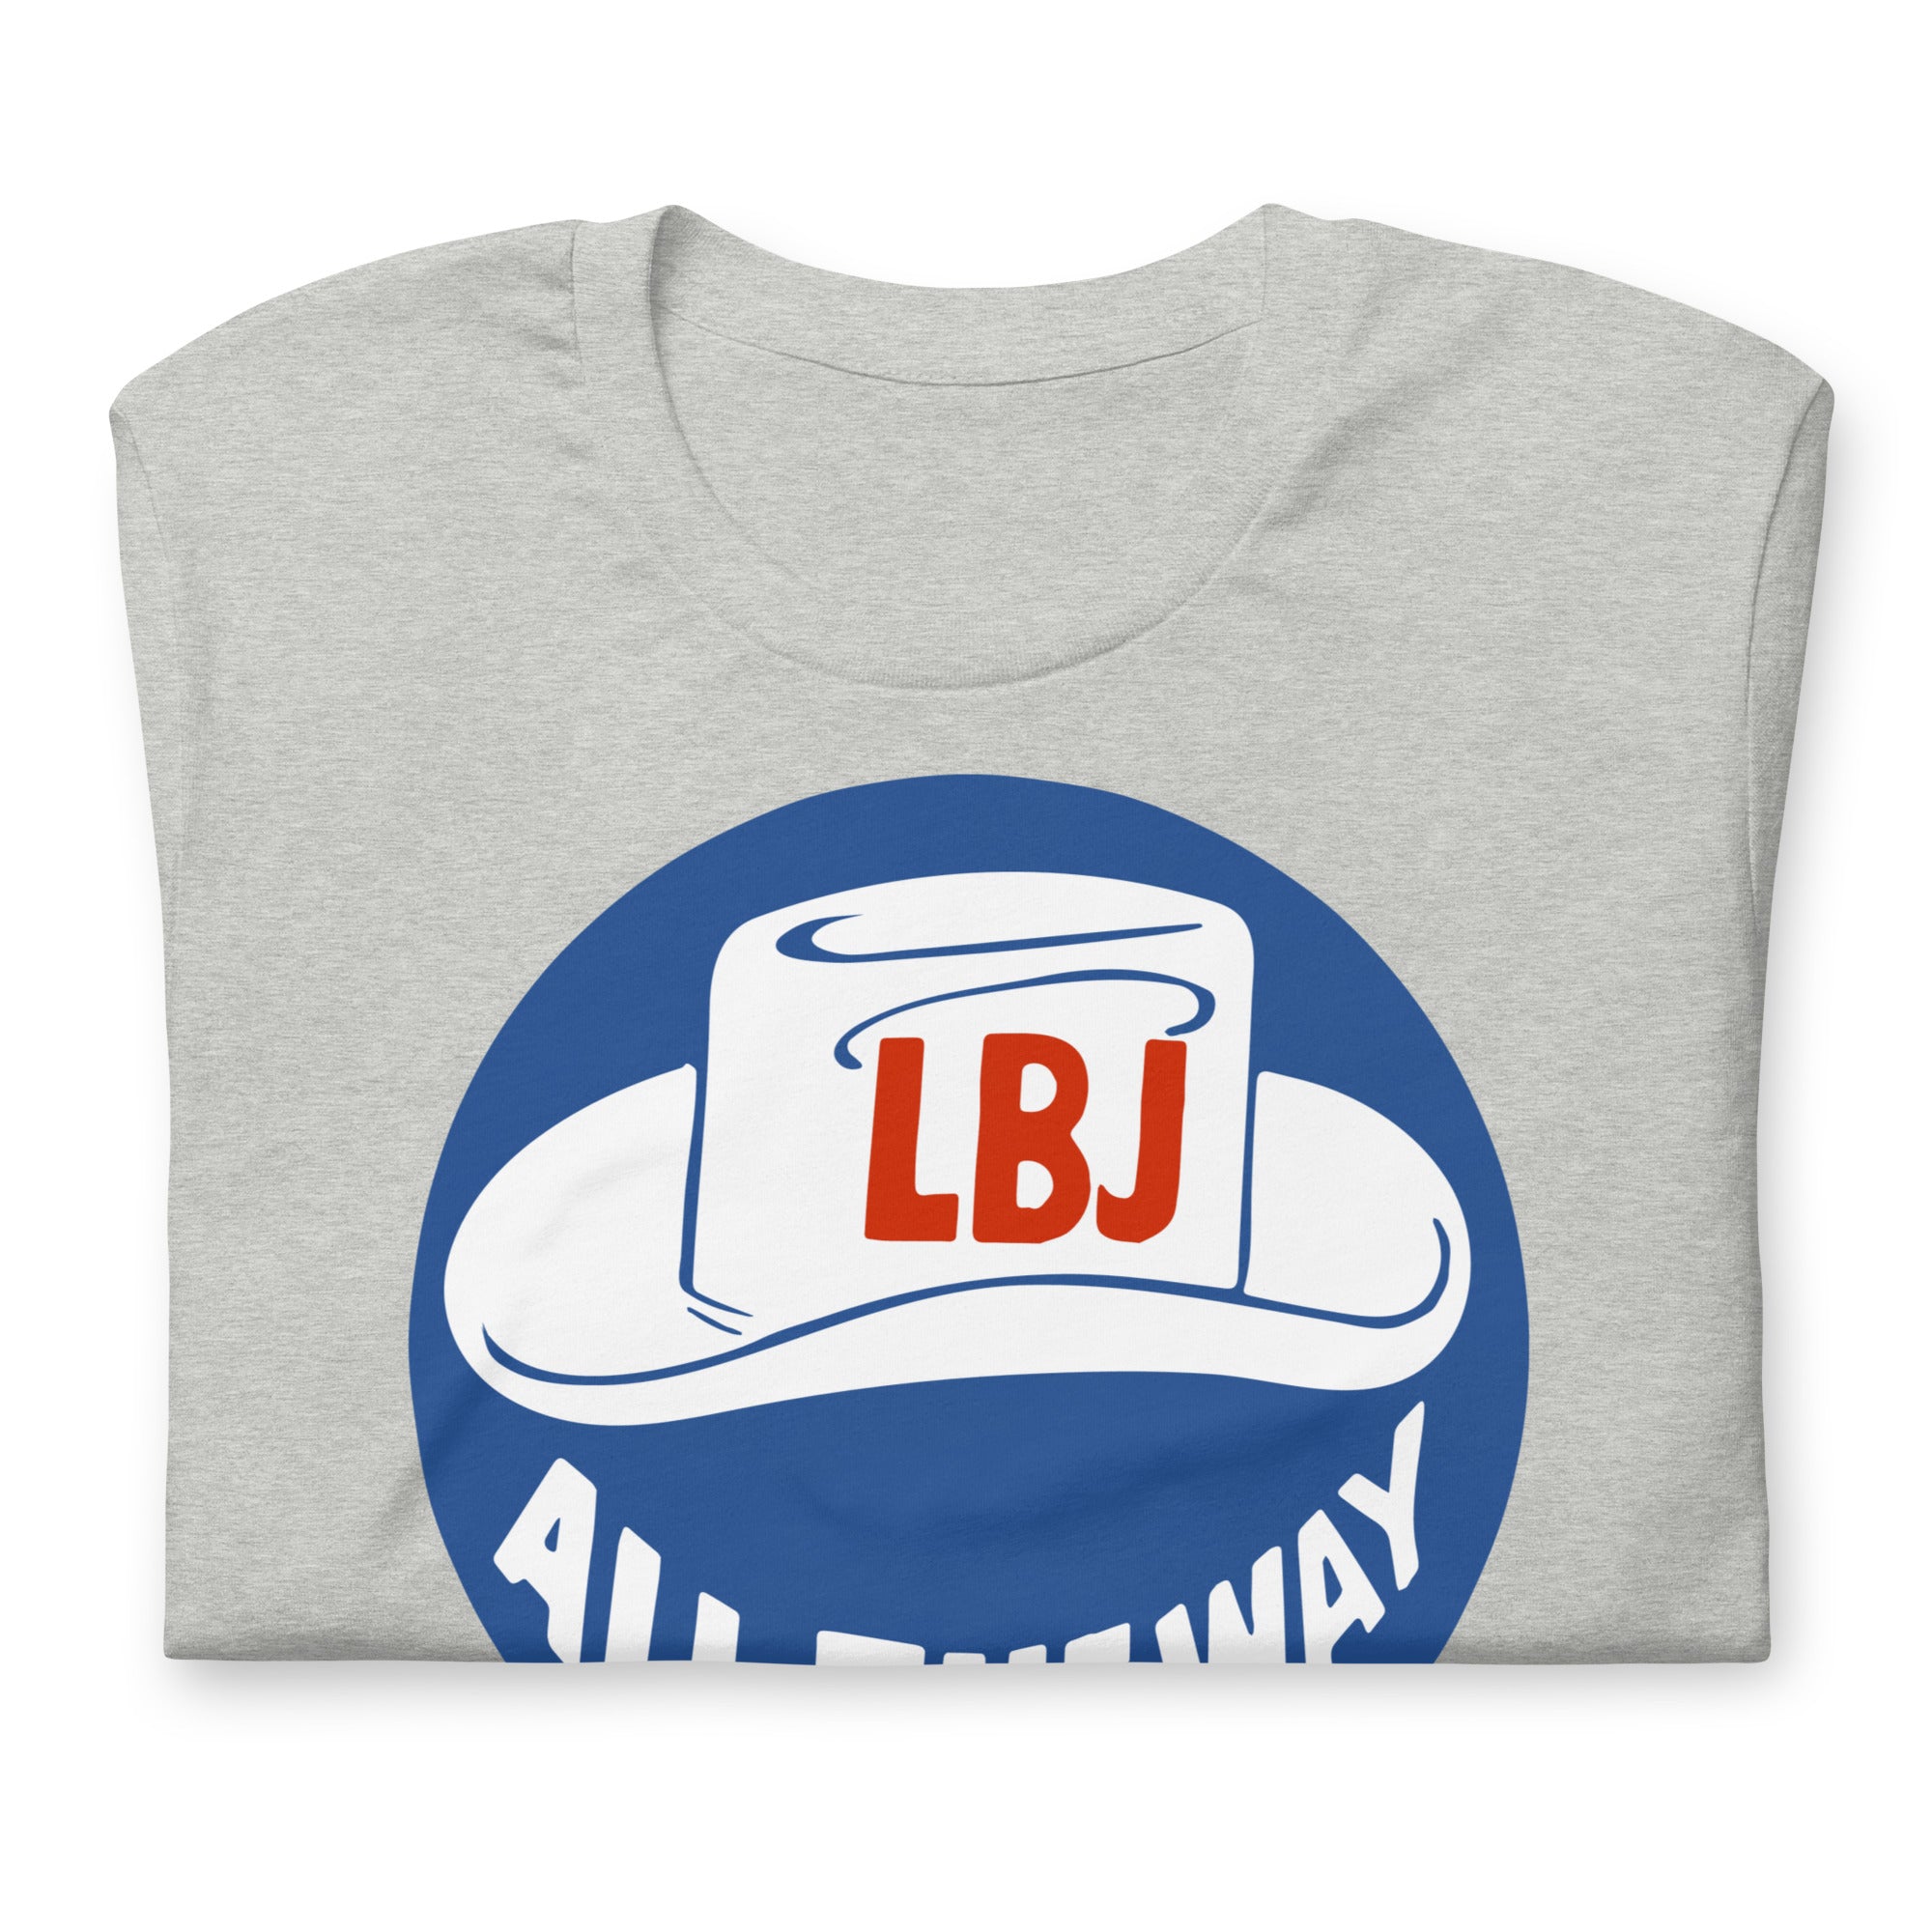 LBJ All the Way 1964 Campaign T-Shirt